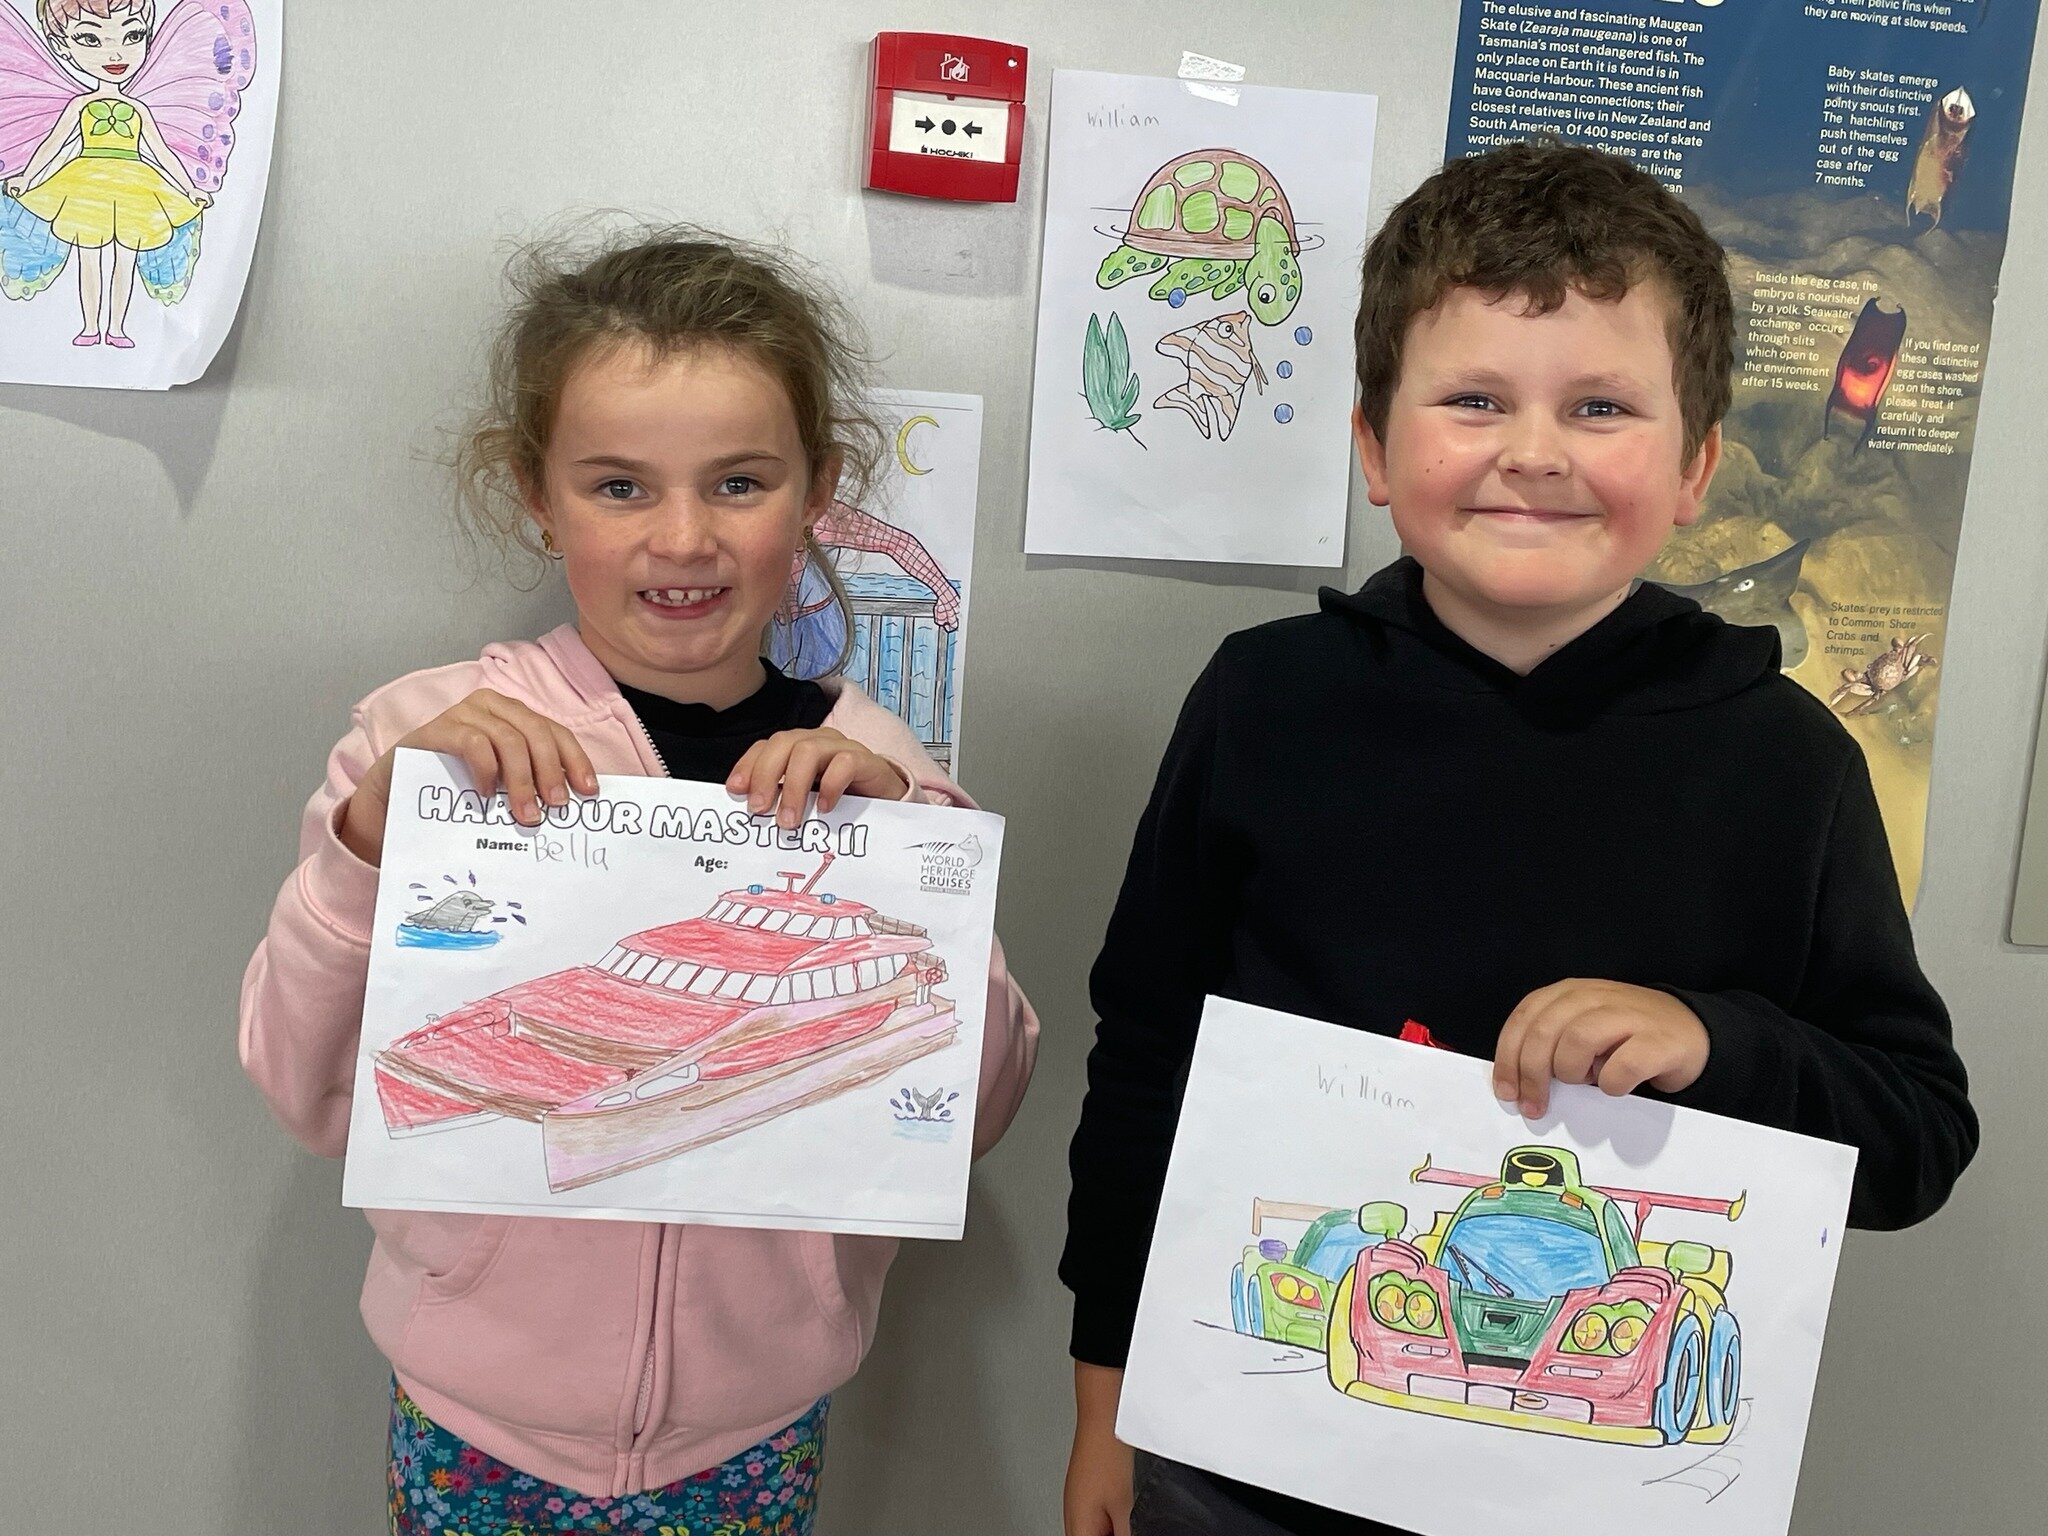 Some wonderful colouring in has been on show recently with our little visitors! Great work shown here by William and Bella.